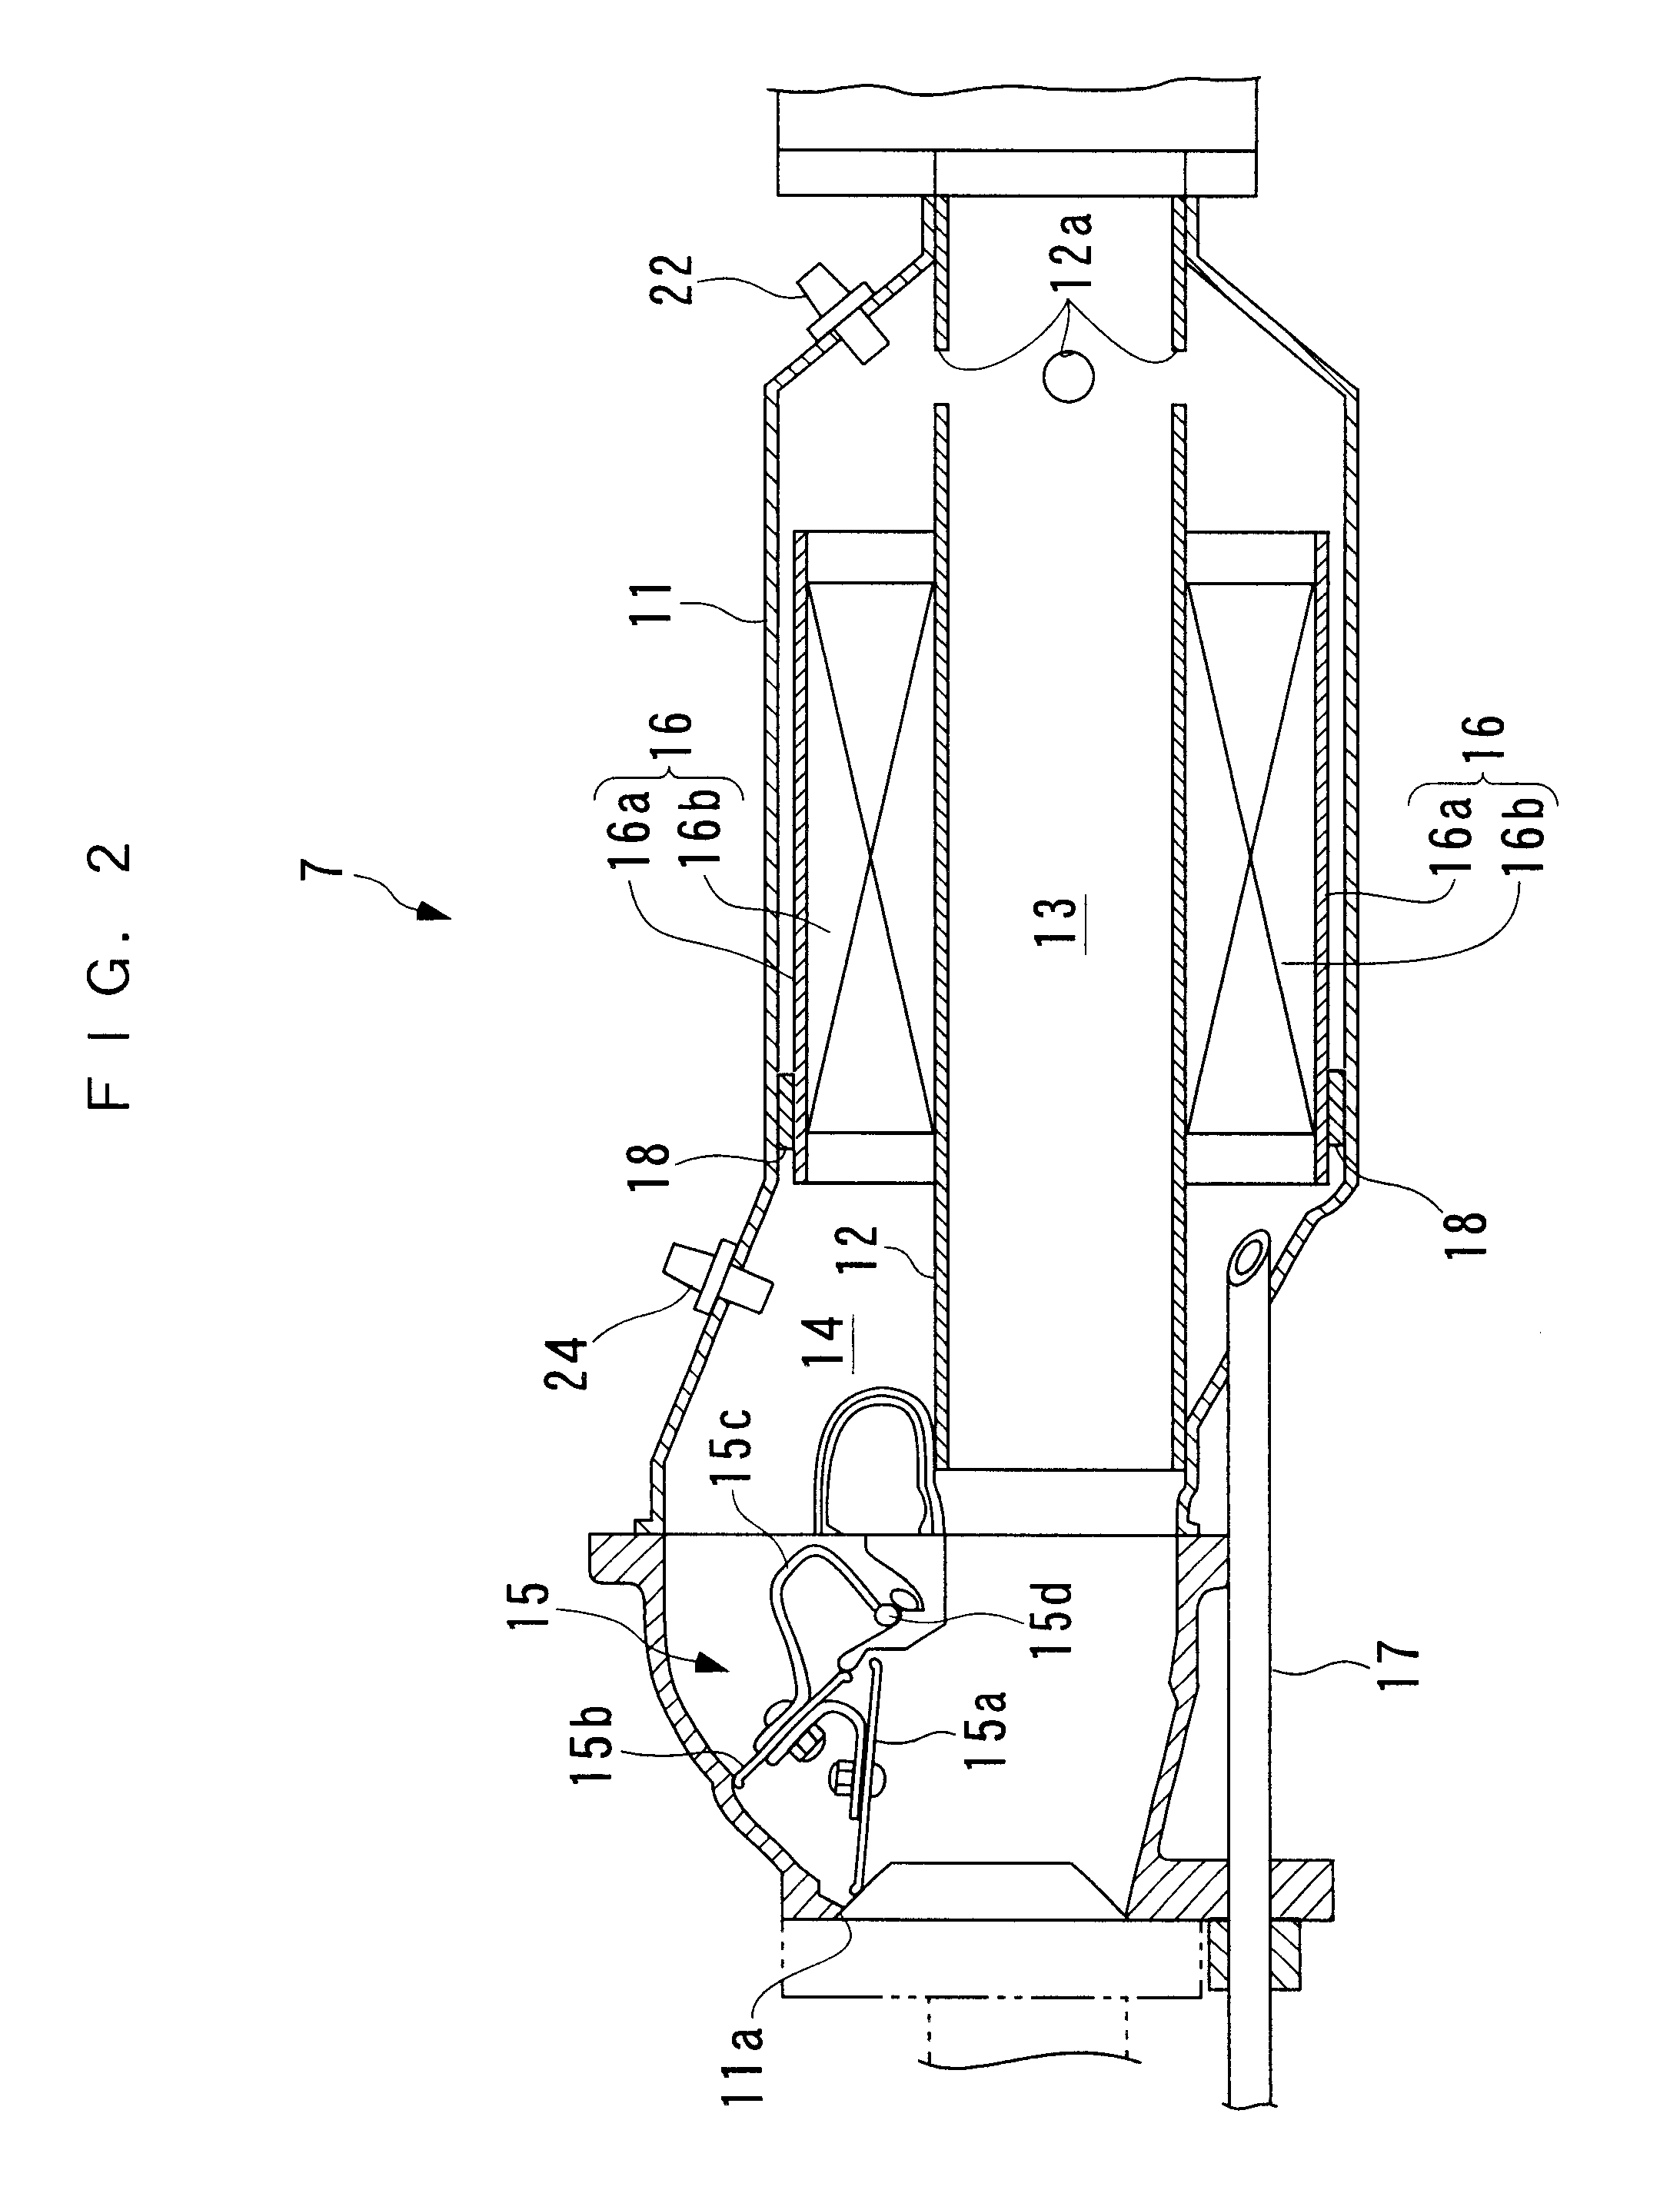 Catalyst state detector for exhaust gas purifying catalyst